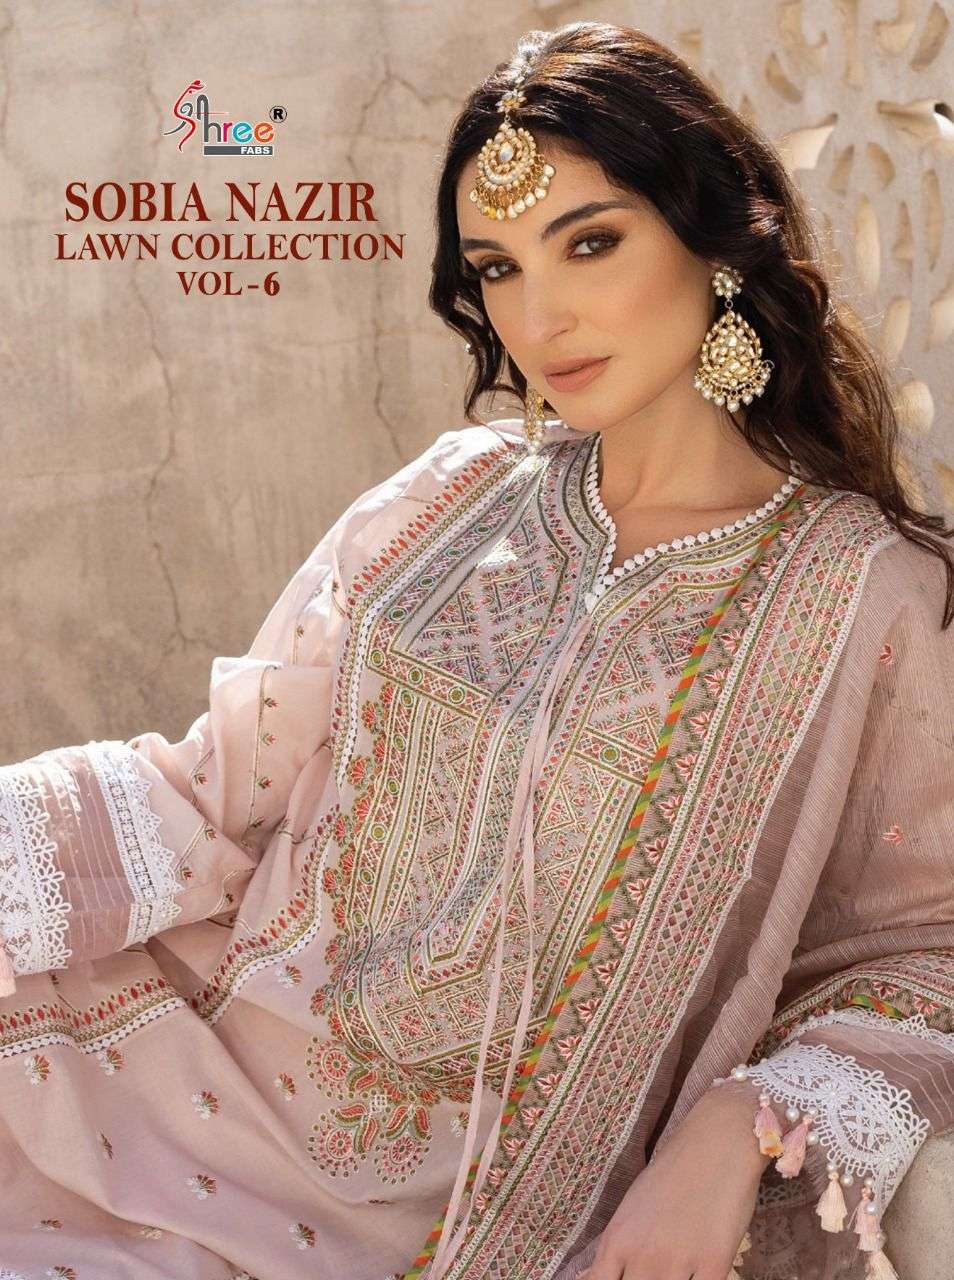 Shree Fabs Sobiya Nazir Lawn Collection Vol 6 Cotton With Fa...